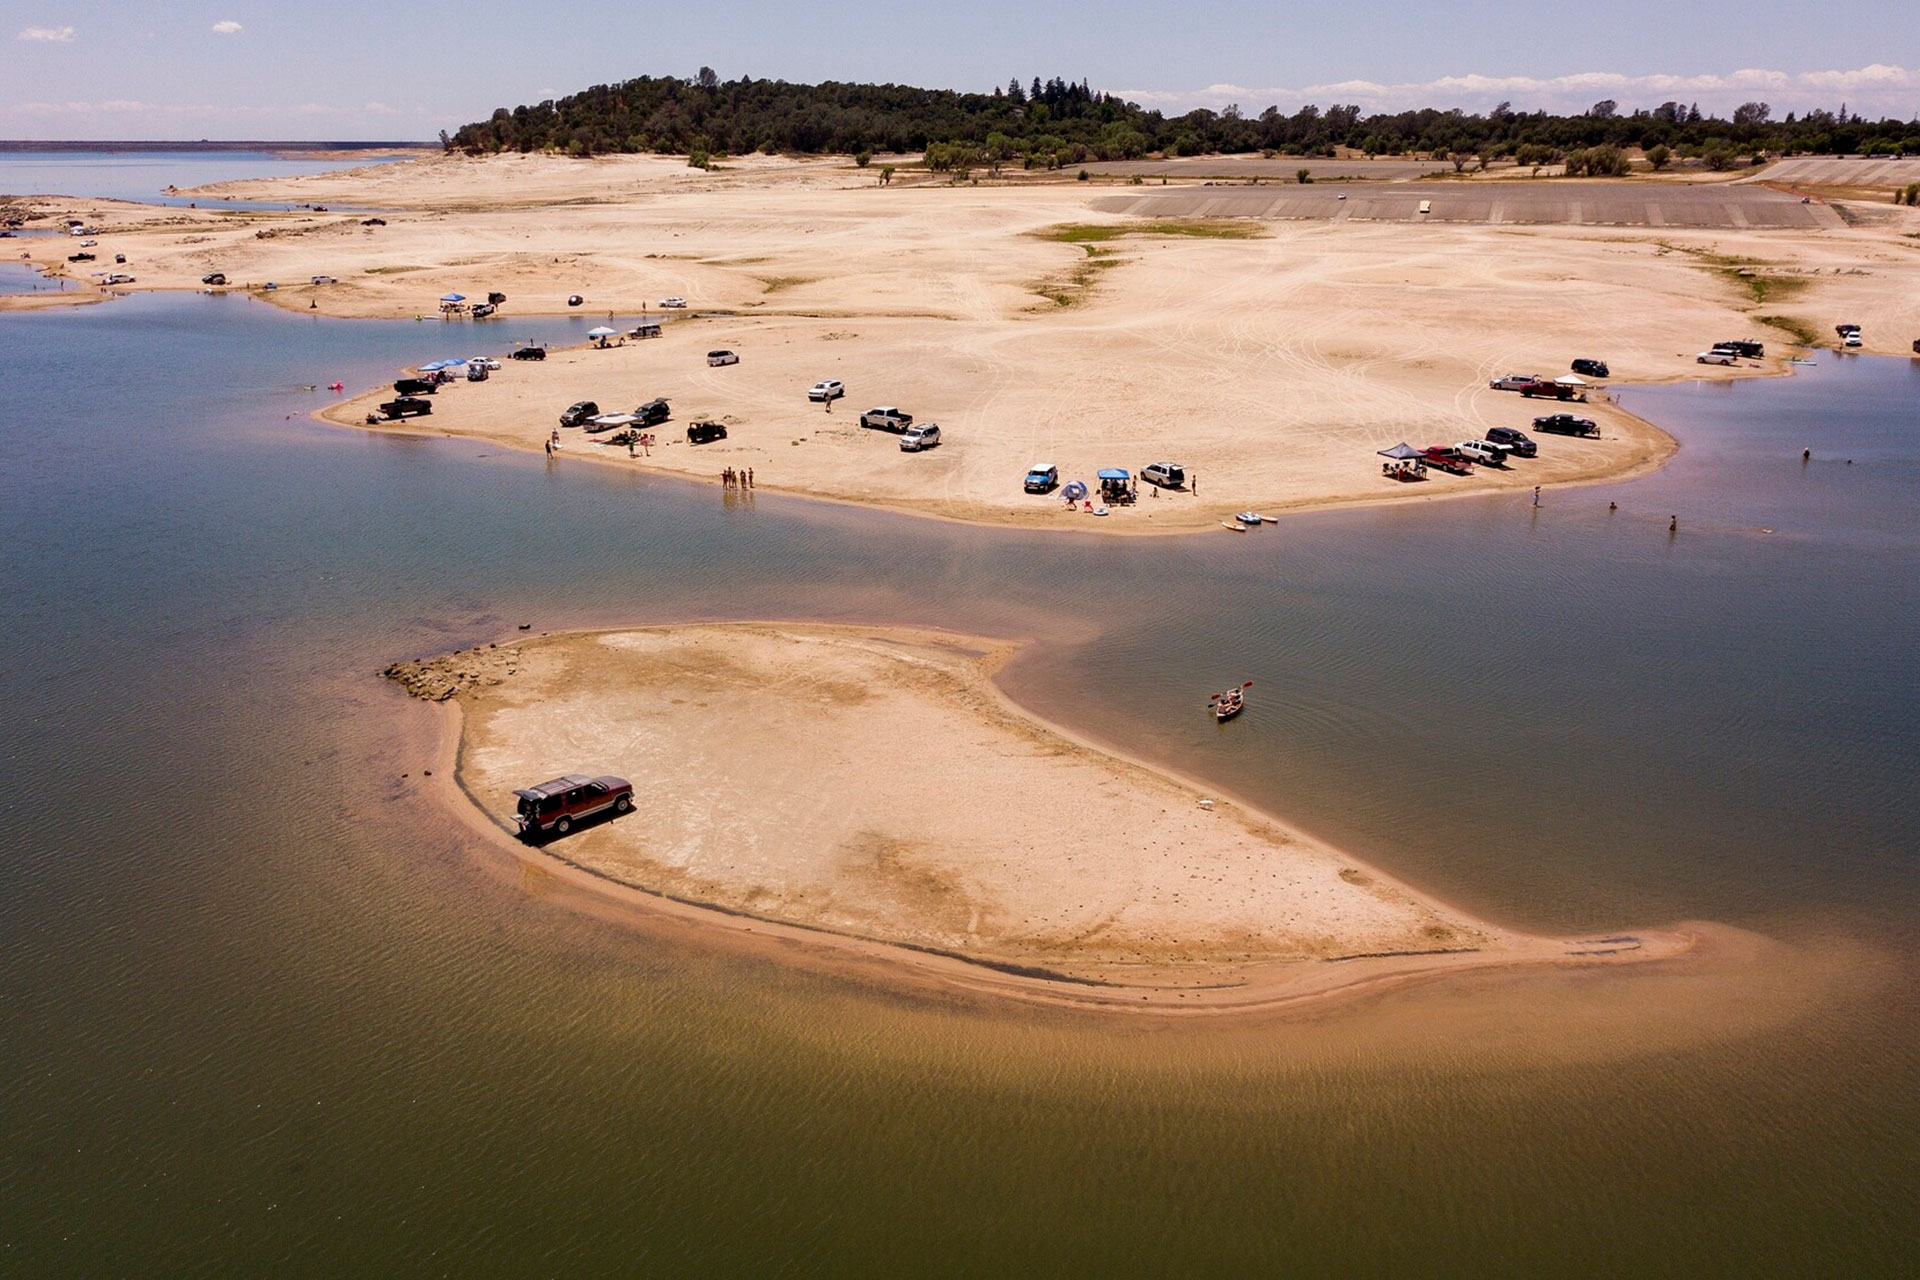 An aerial view of Folsom Lake with very little water. Vehicles are parked on patches of land where water should be.